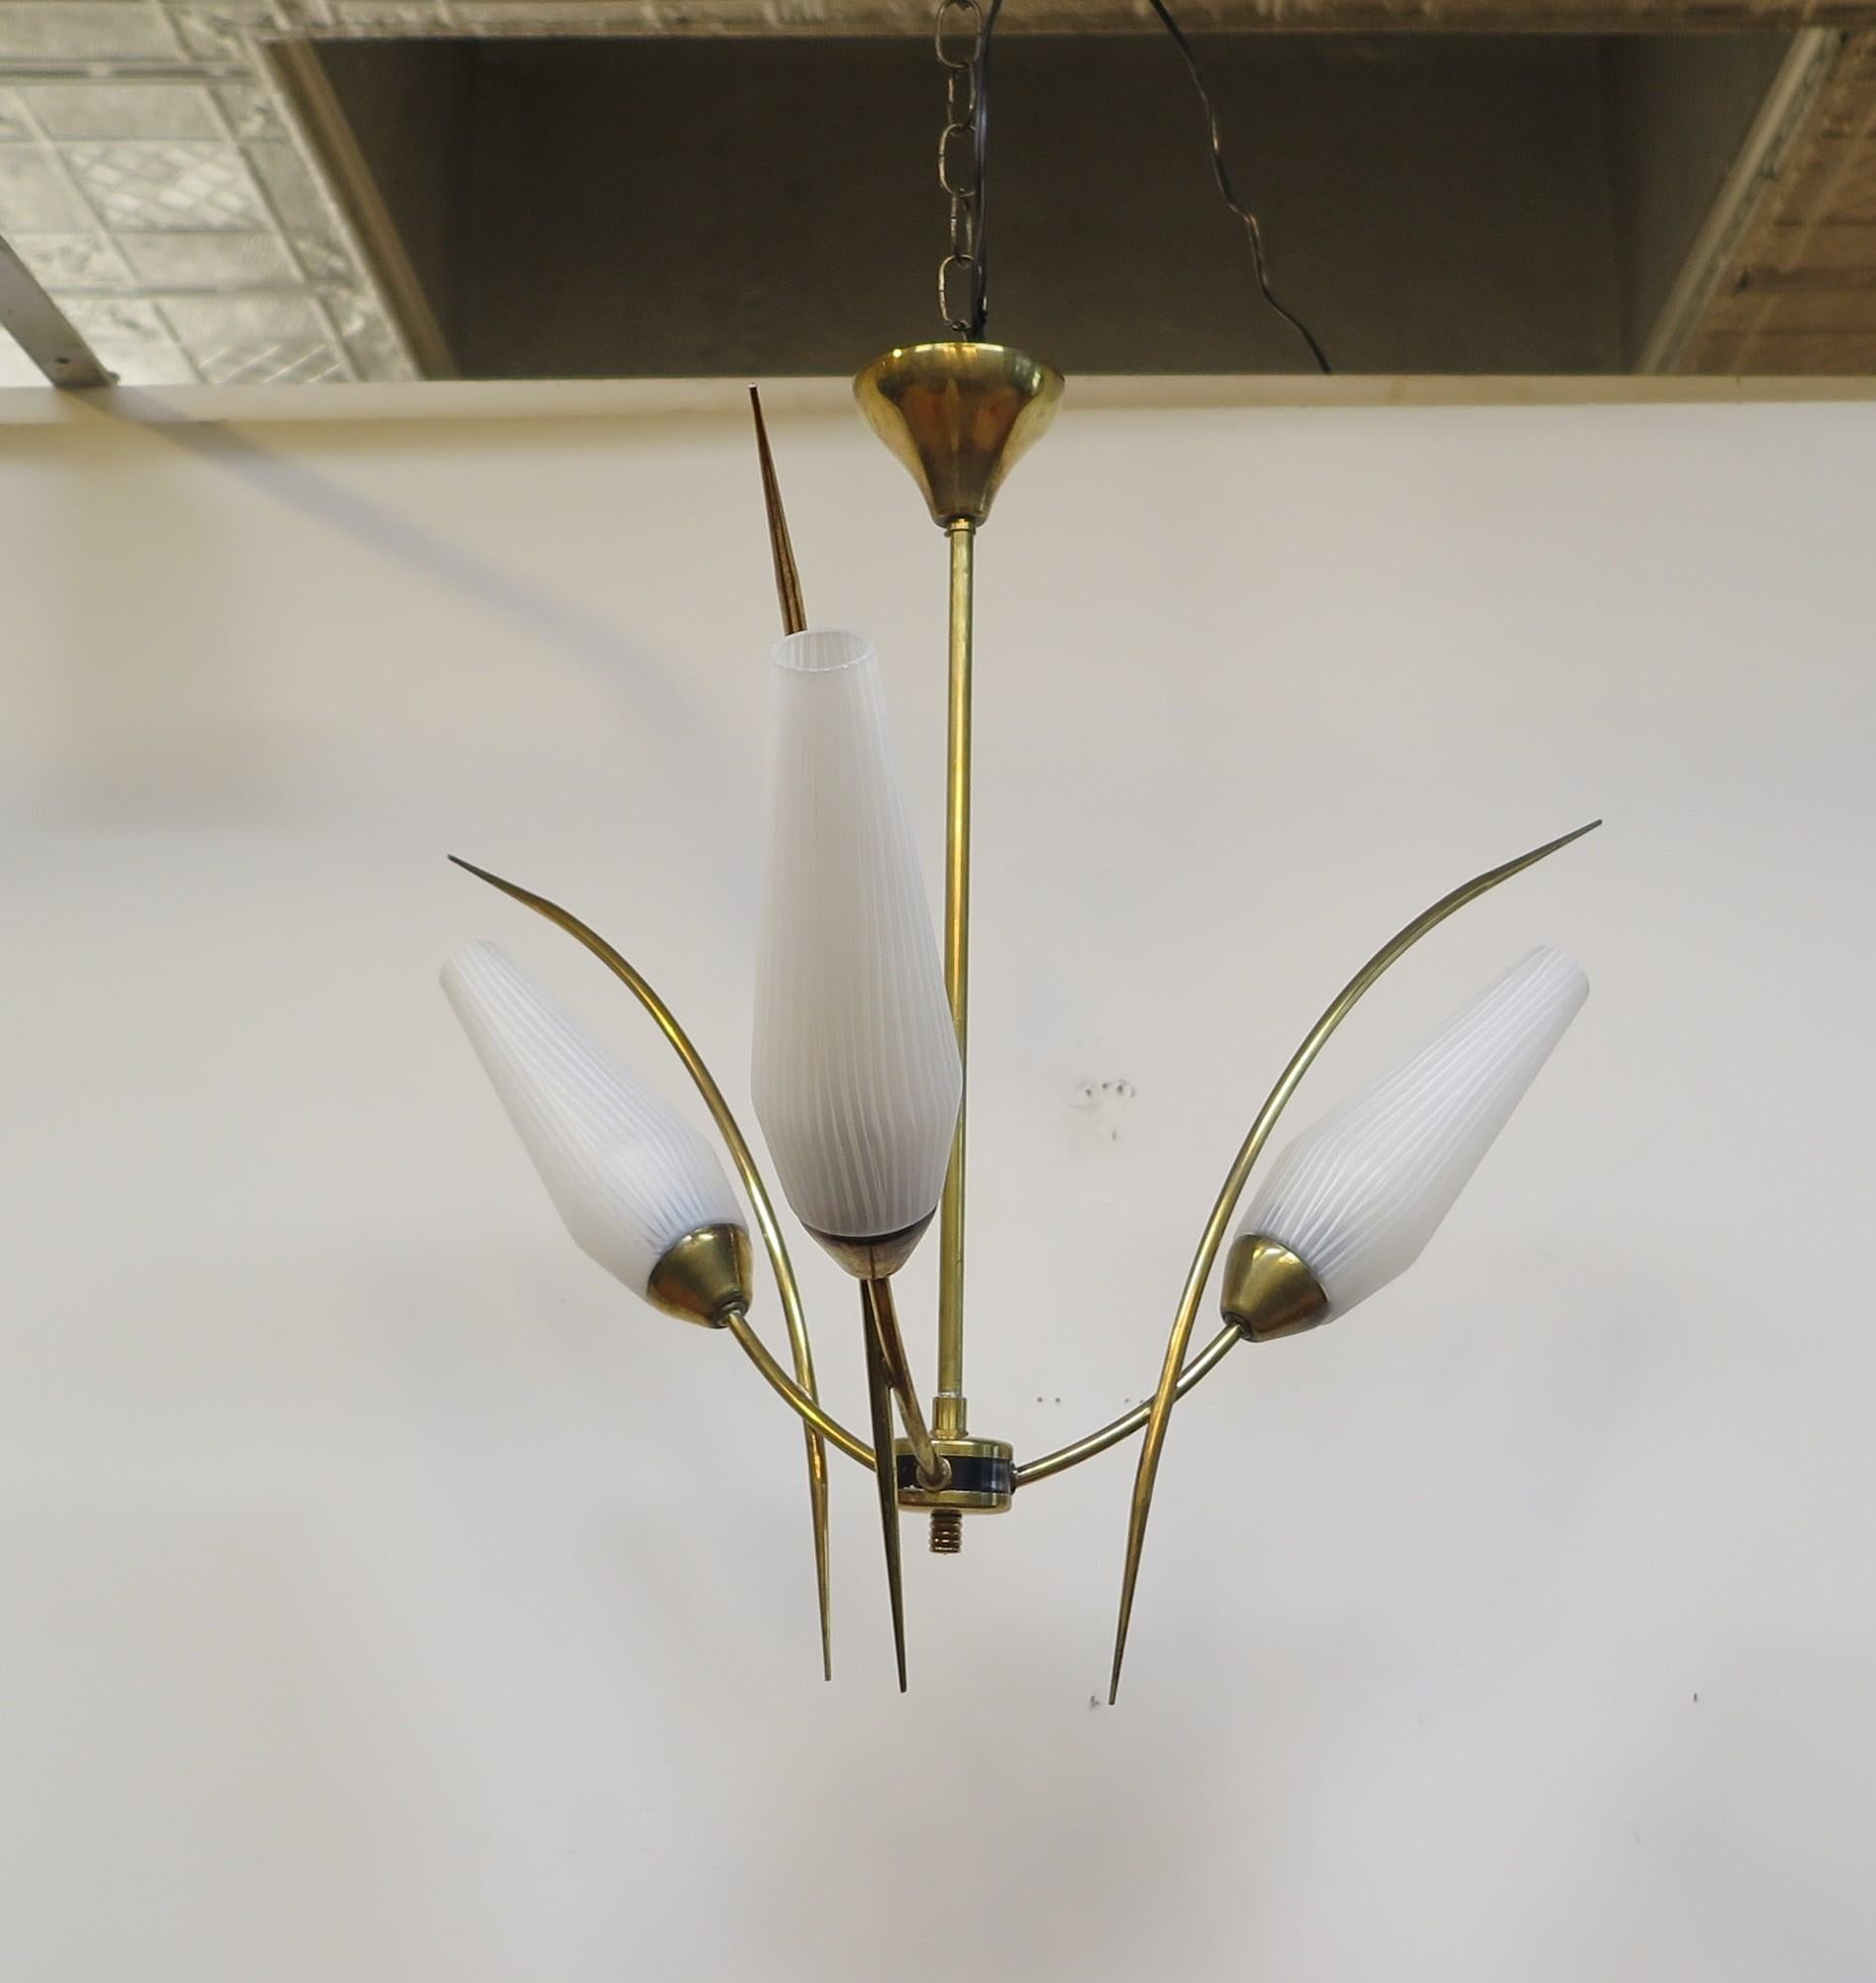 French Mid Century Brass Chandelier by Maison Arlus. Elegant brass arms with hand blown opaline glass shade diffusers. The glass shades have a striated effect in the glass consisting of white opaline glass lines and frosted glass lines in parallel